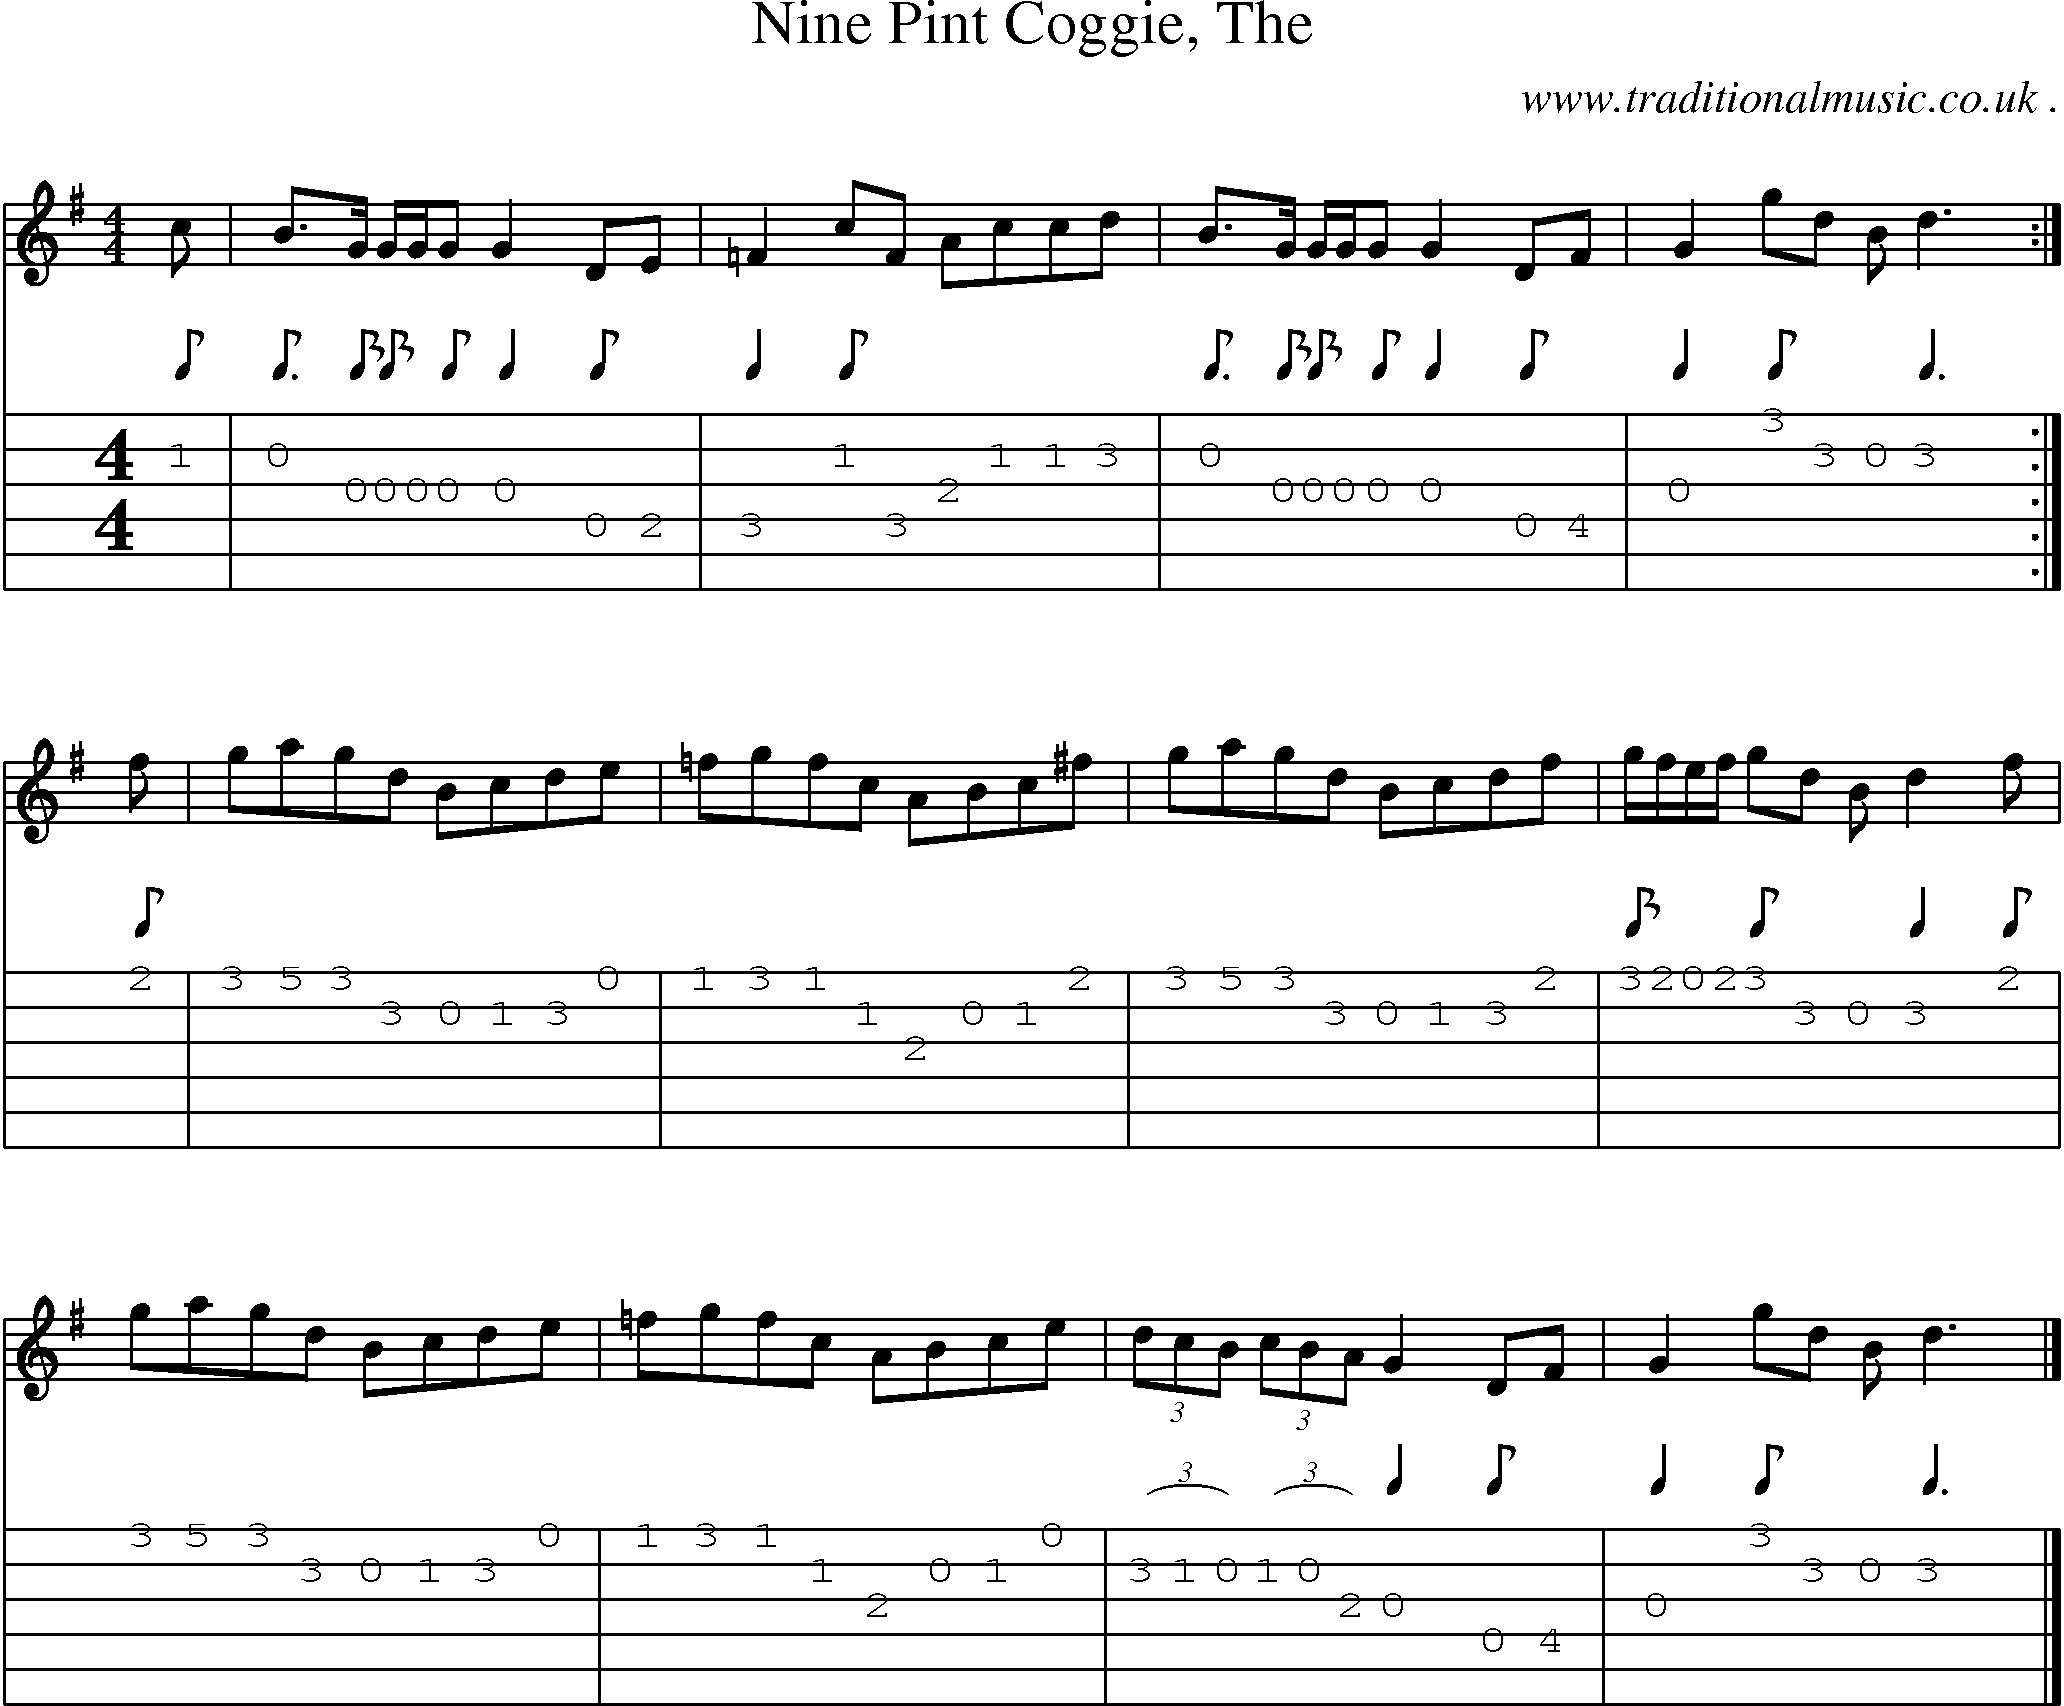 Sheet-music  score, Chords and Guitar Tabs for Nine Pint Coggie The